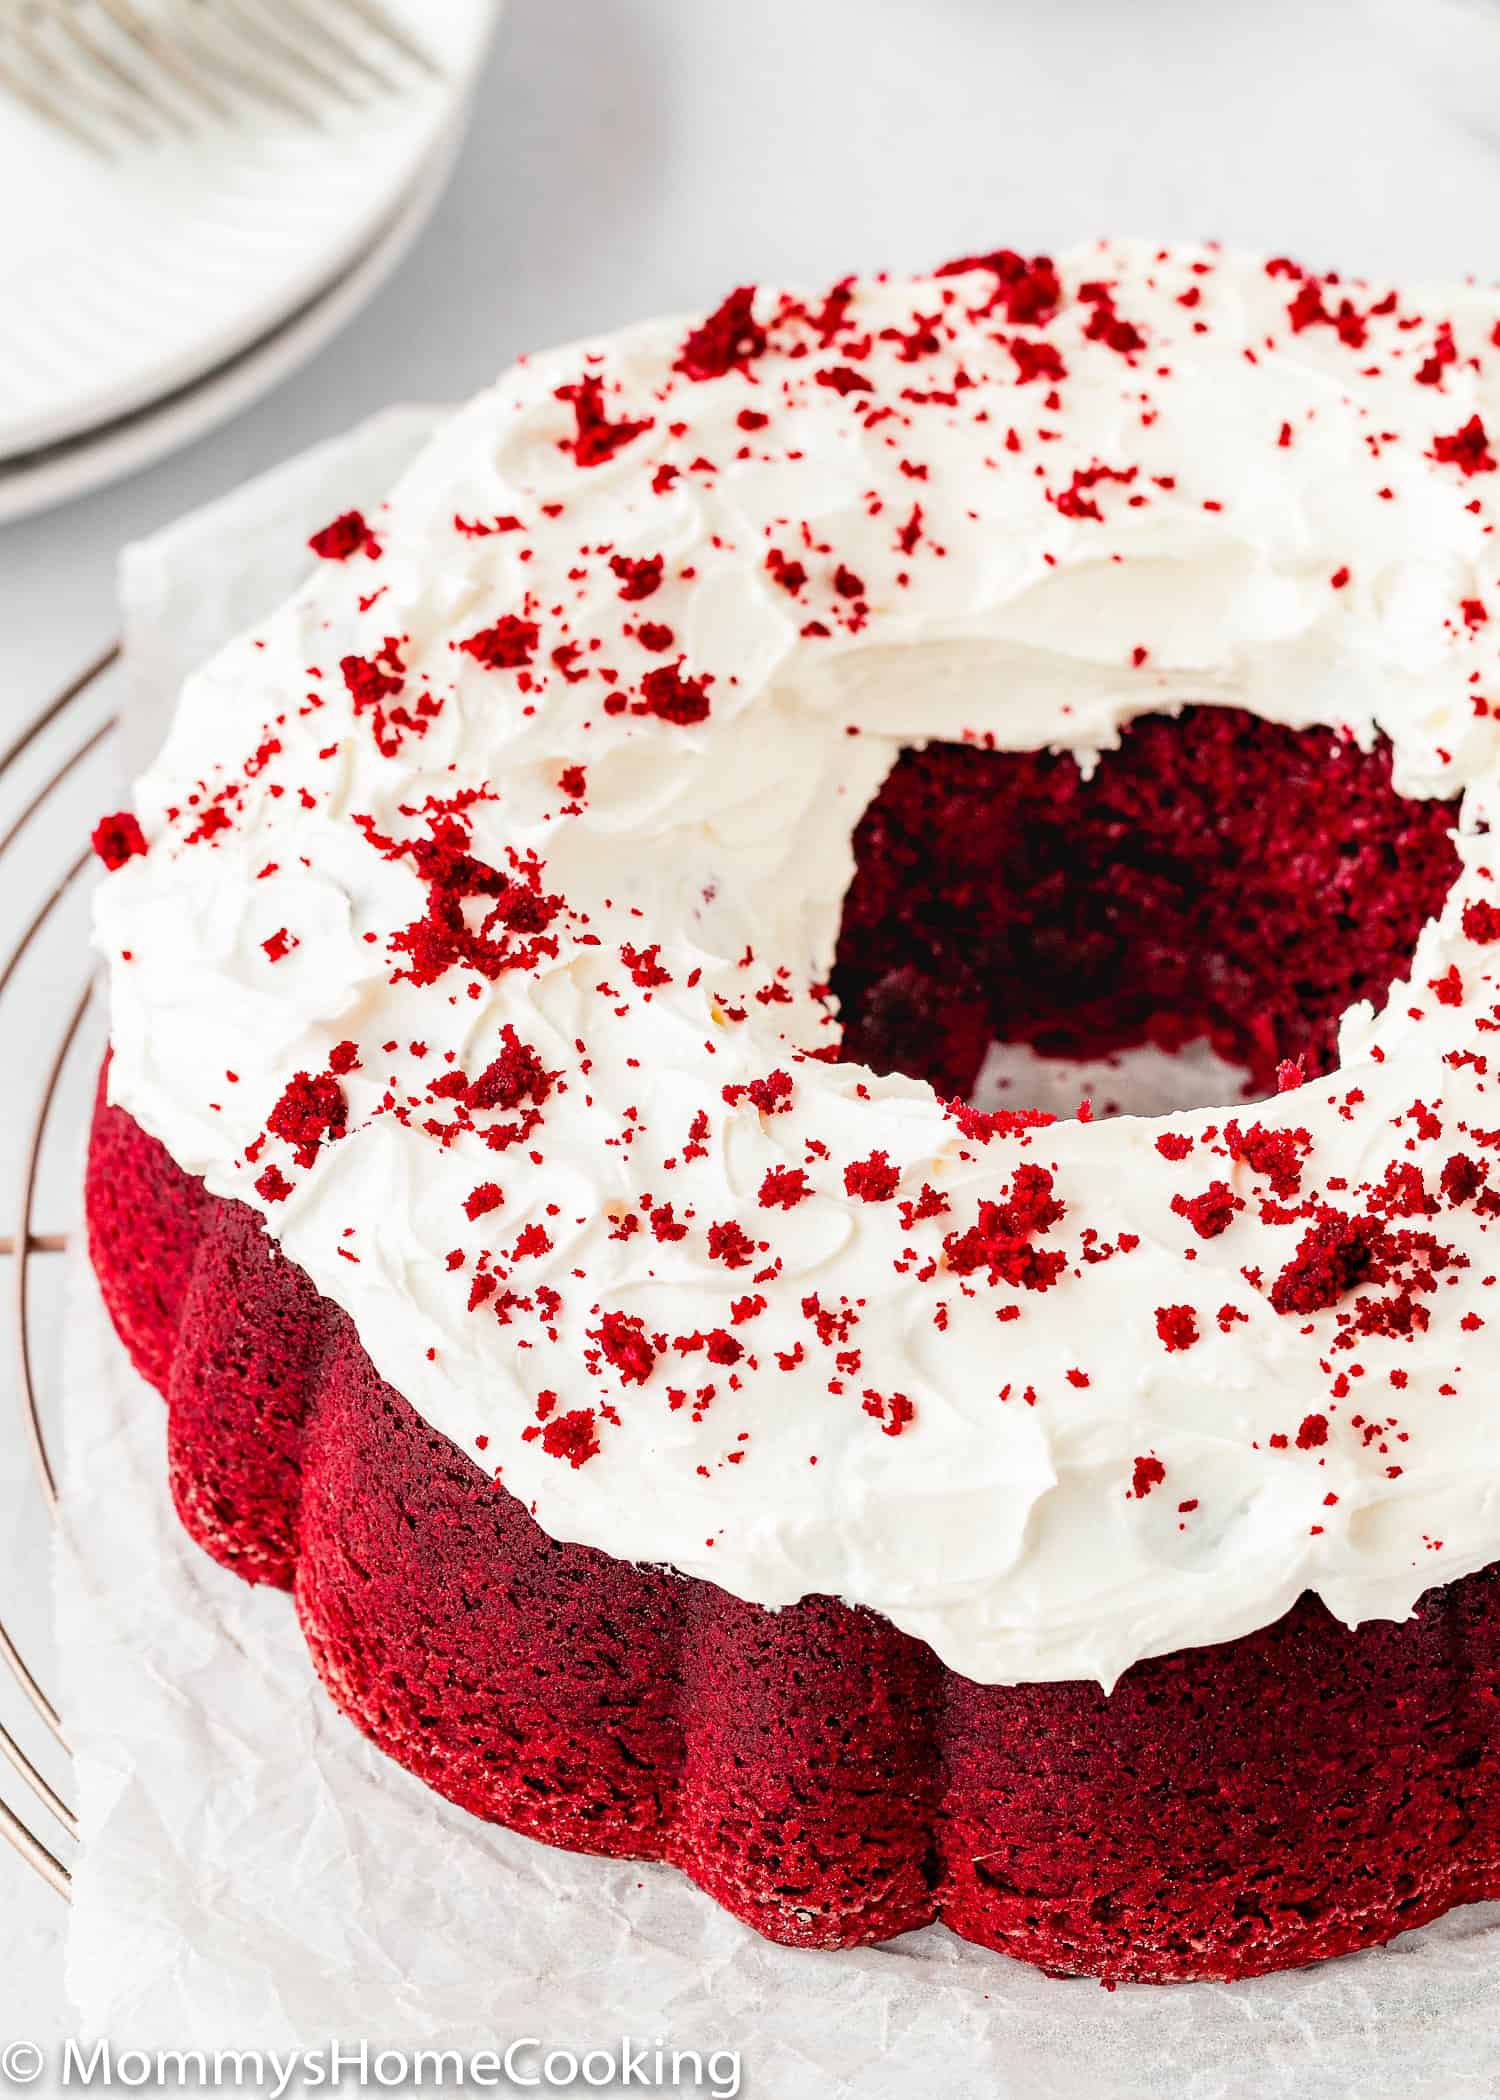 Eggless Red Velvet Bundt Cake topped with Cream cheese frosting.